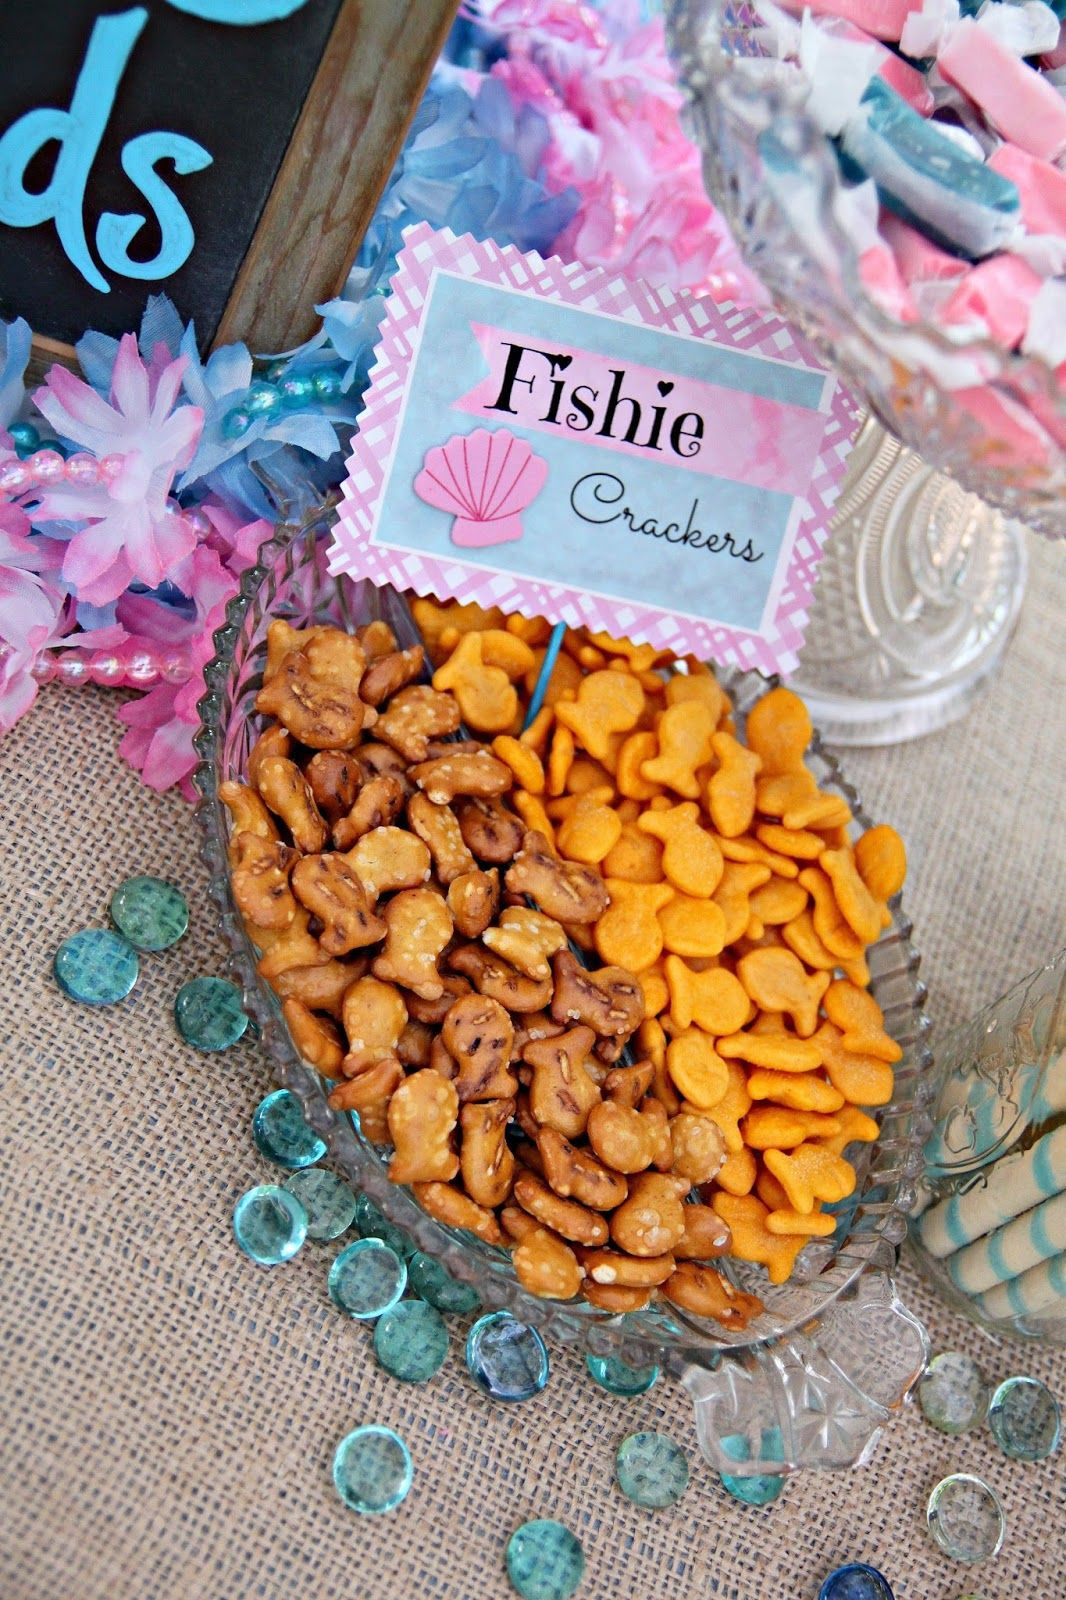 Little Mermaid Party Food Ideas
 Mermaid Birthday Party Food Can t have an under the